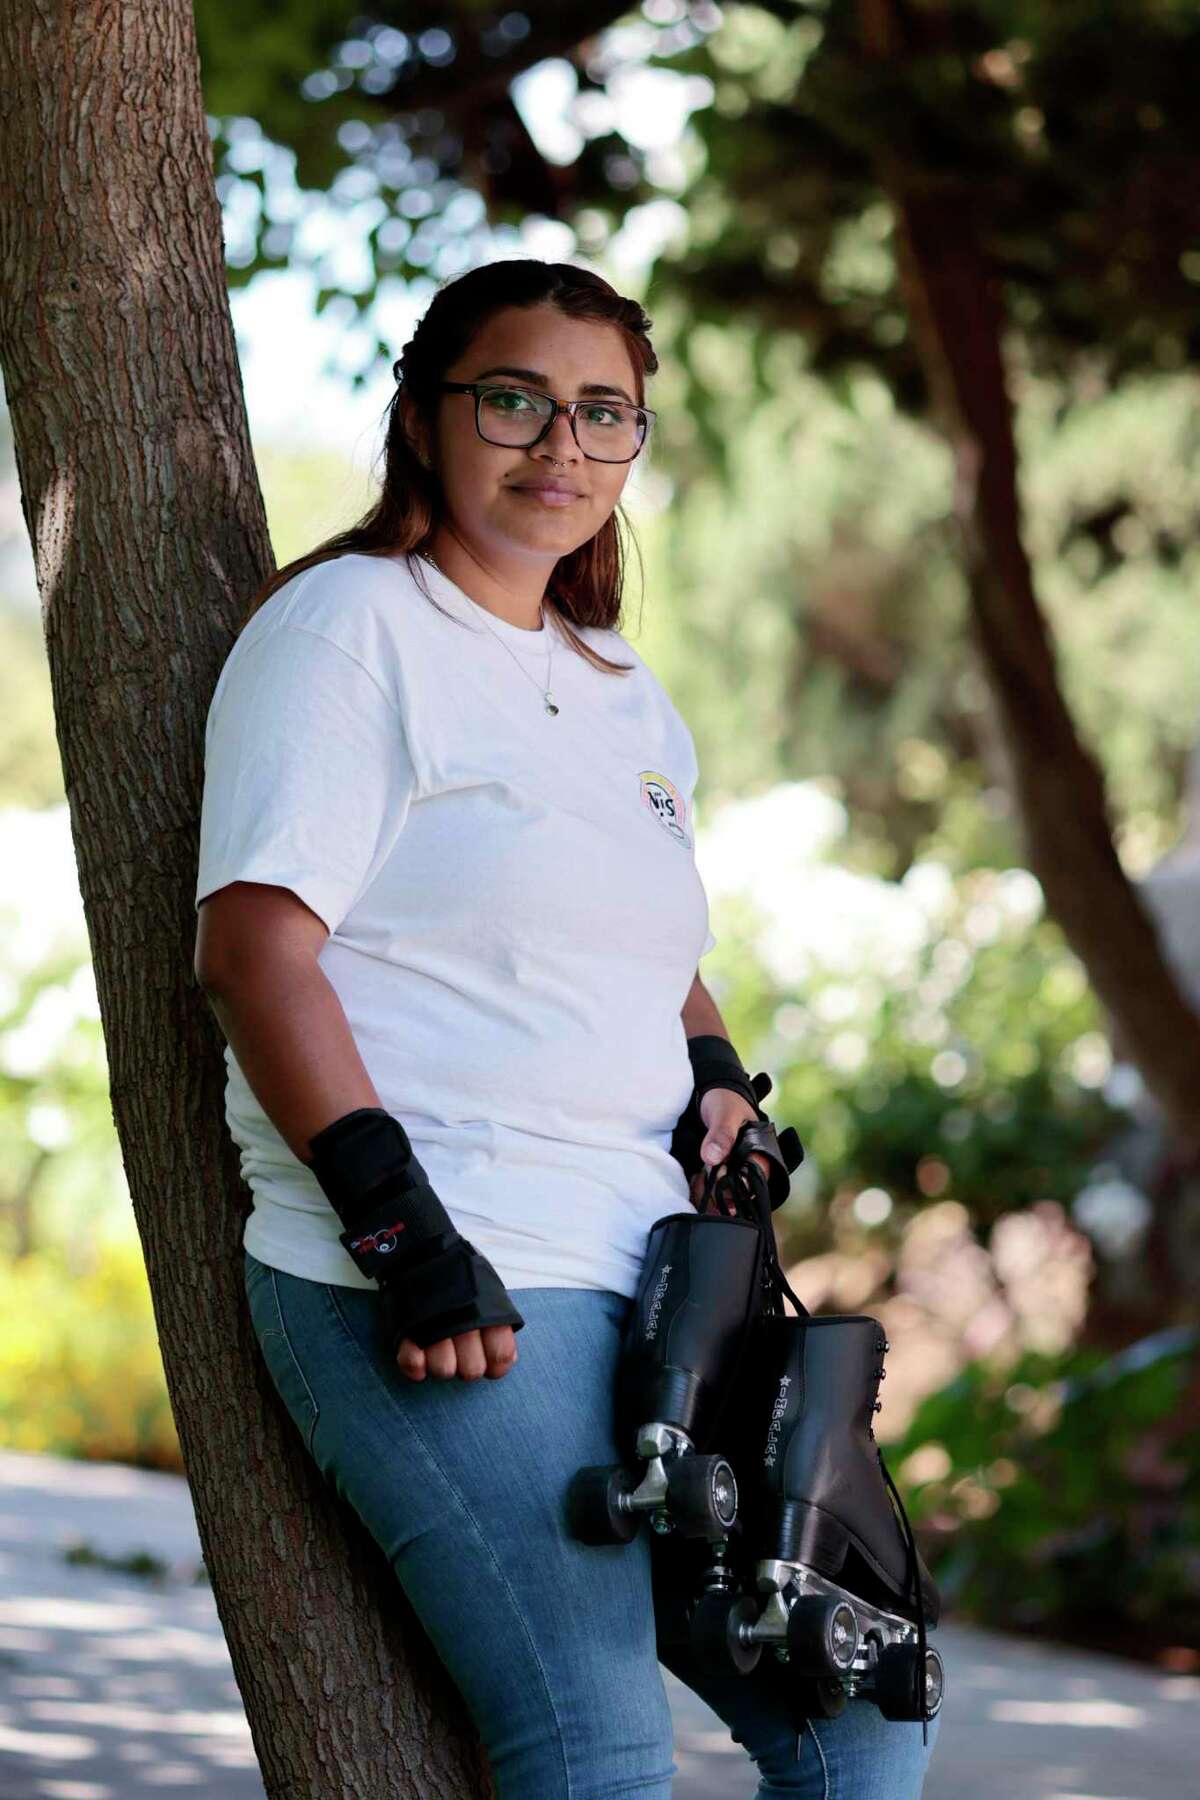 Veronica Vieyra, who graduated from San Jose State University in May, is one of 72 former foster youths who received monthly payments under a universal income pilot program in Santa Clara County.